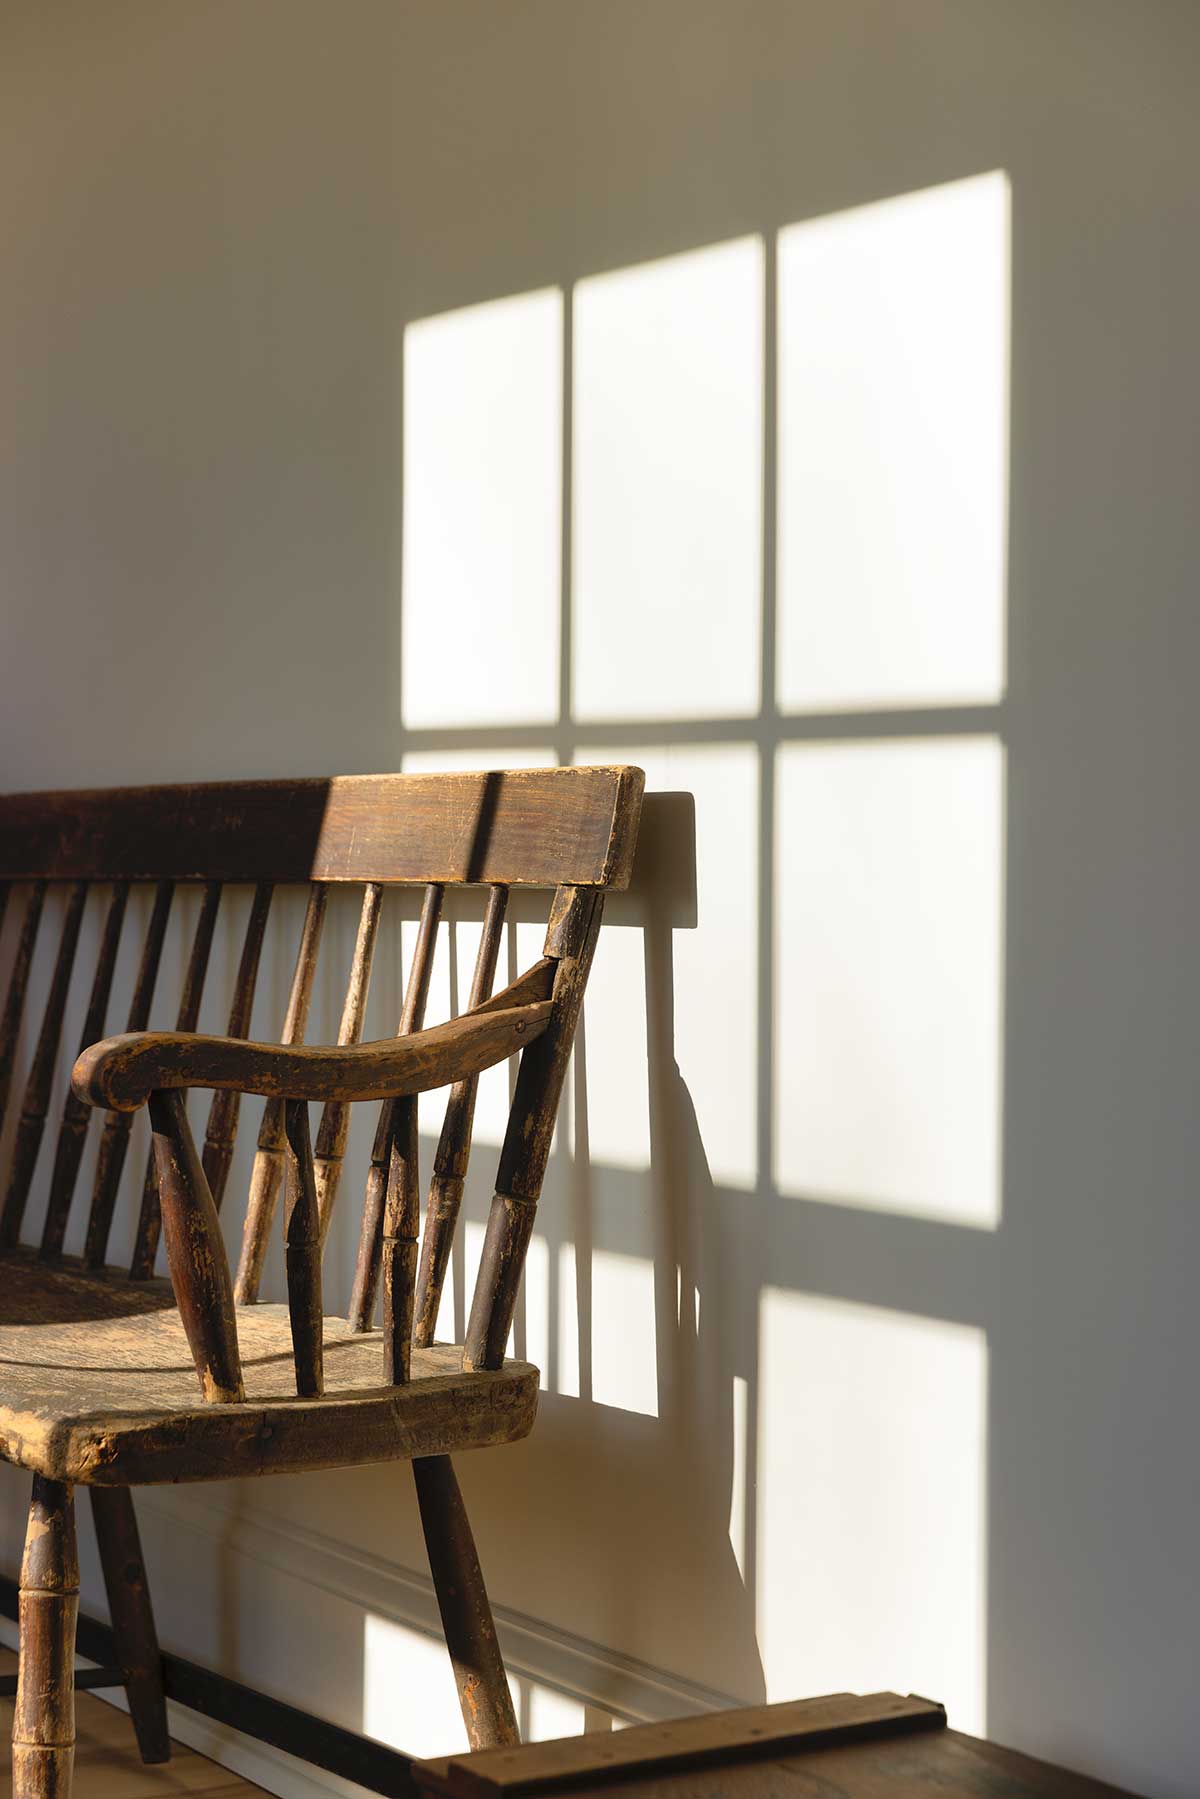 A wooden bench in a hallway with shadows from a window cast on the wall.